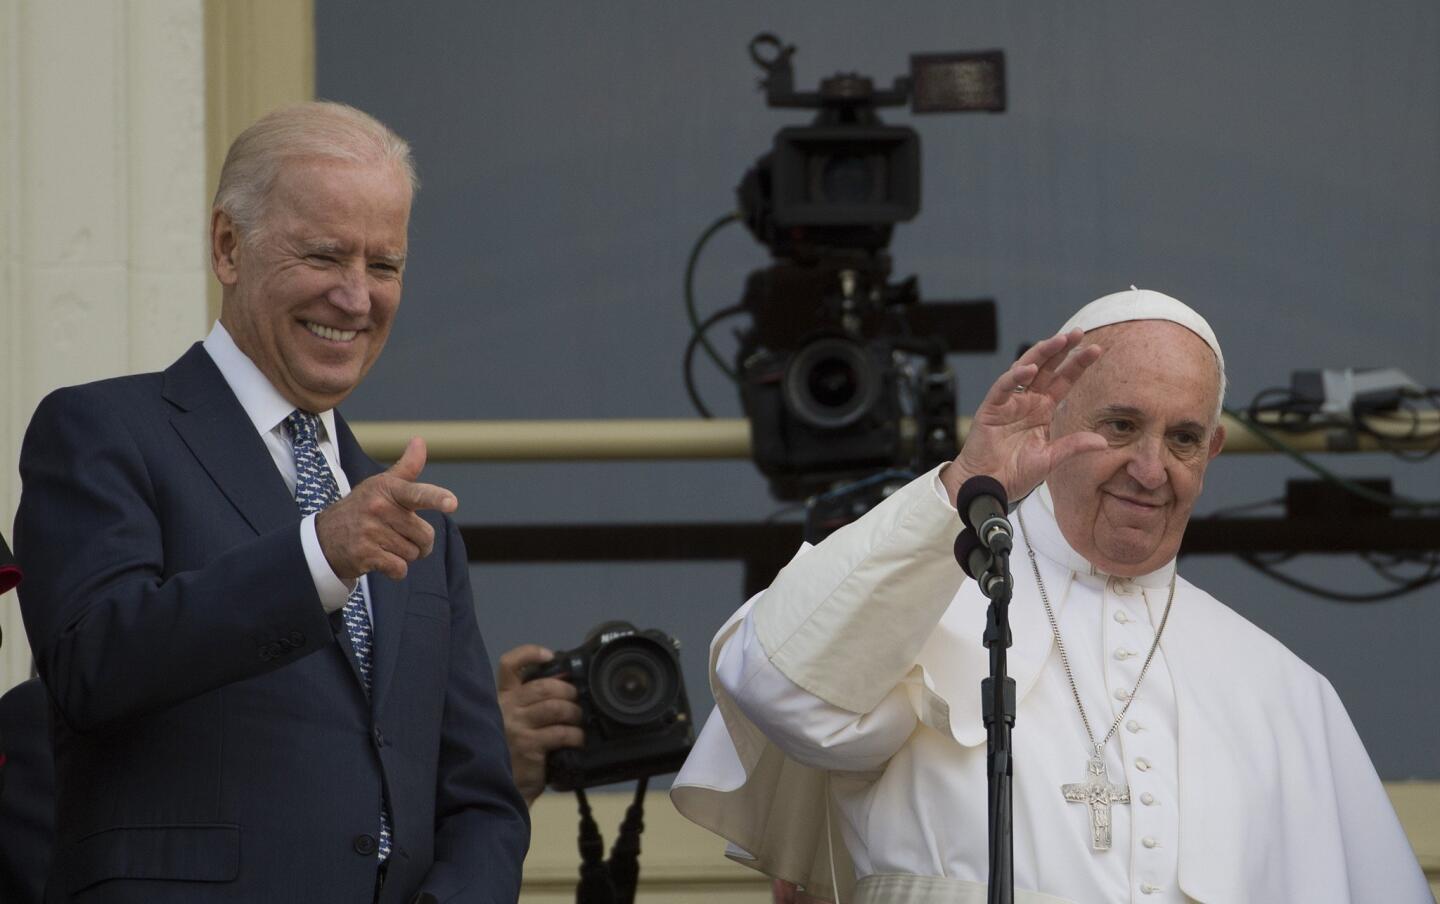 Pope Francis, accompanied by Vice President Joe Biden, waves to the crowd outside the Capitol Building after addressing Congress in Washington, on Sept. 24, 2015.